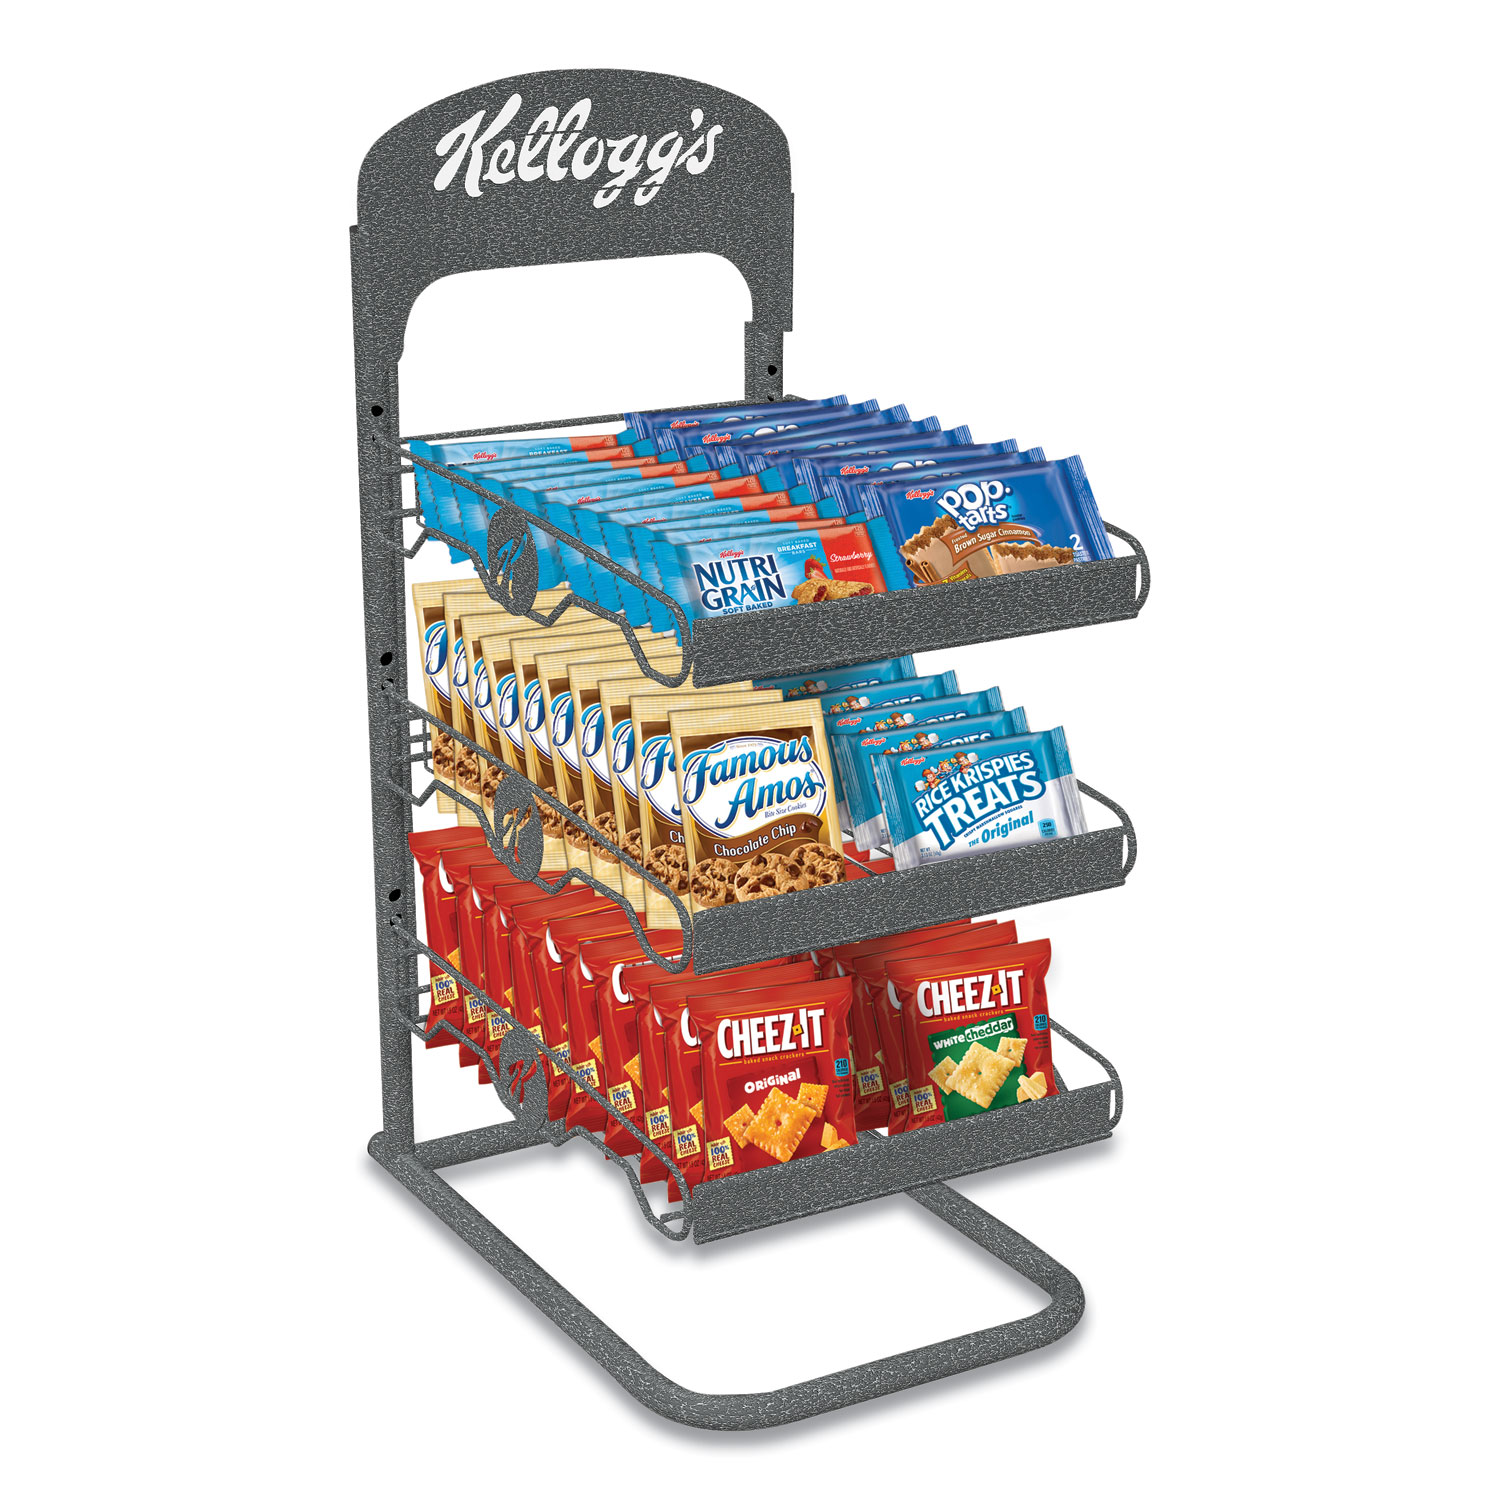  Kellogg's KEE12021 Breakroom Solution Rack with Kellogg's Snack Products, 26.38l x 18.5w x 12.5h (KEB24300792) 